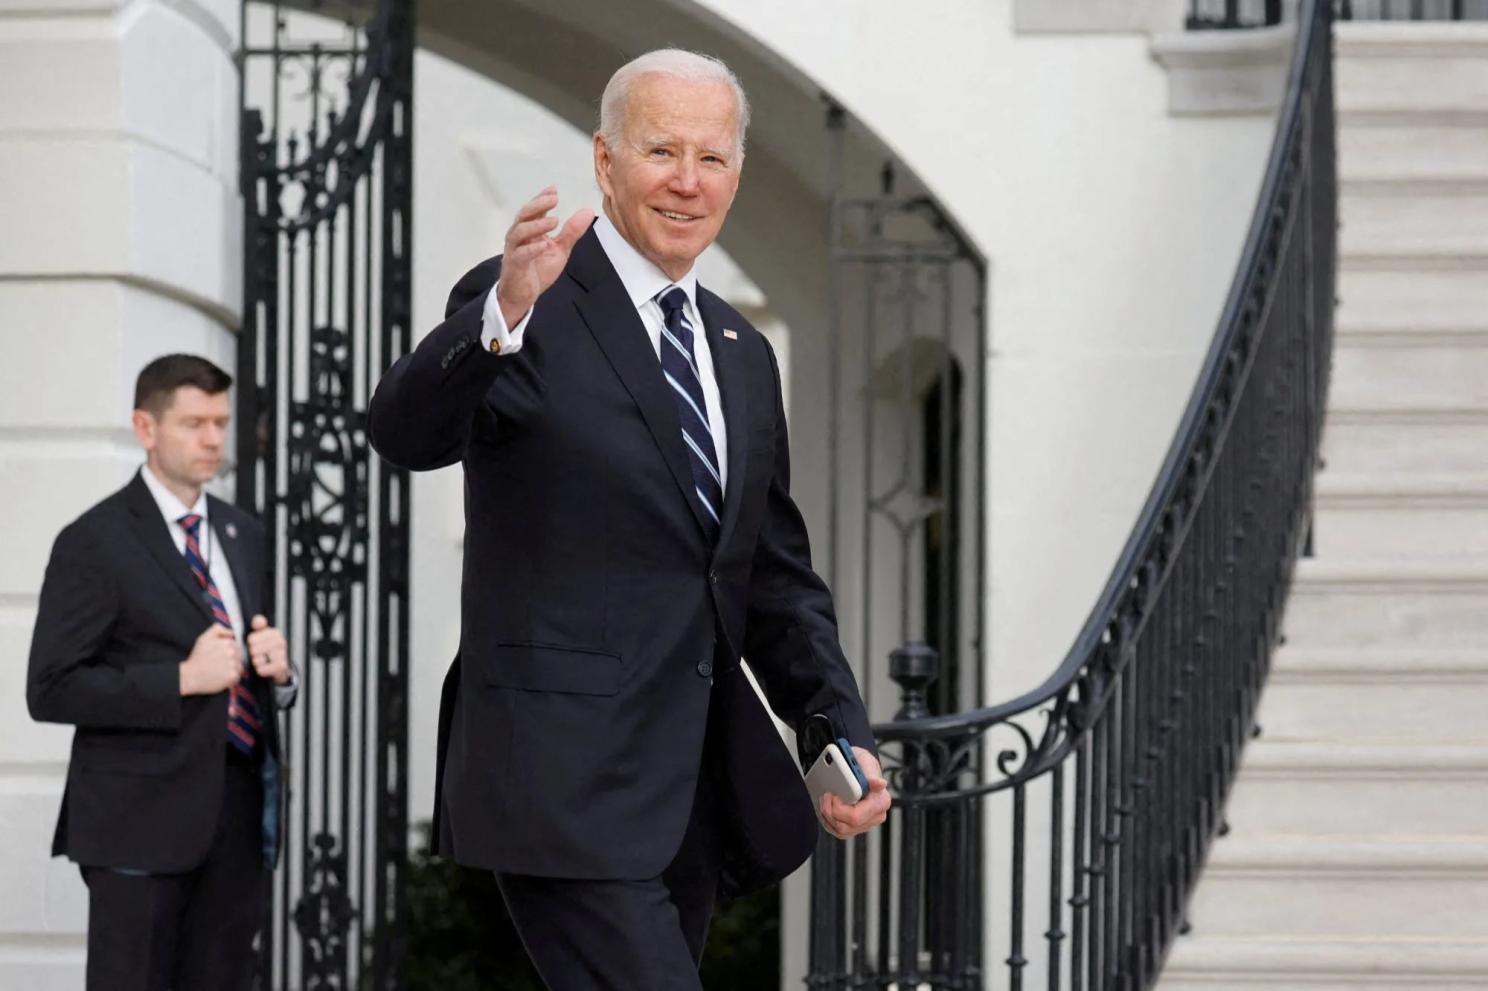 Biden uses his lawyers to find his classified docs — to shield from the FBI